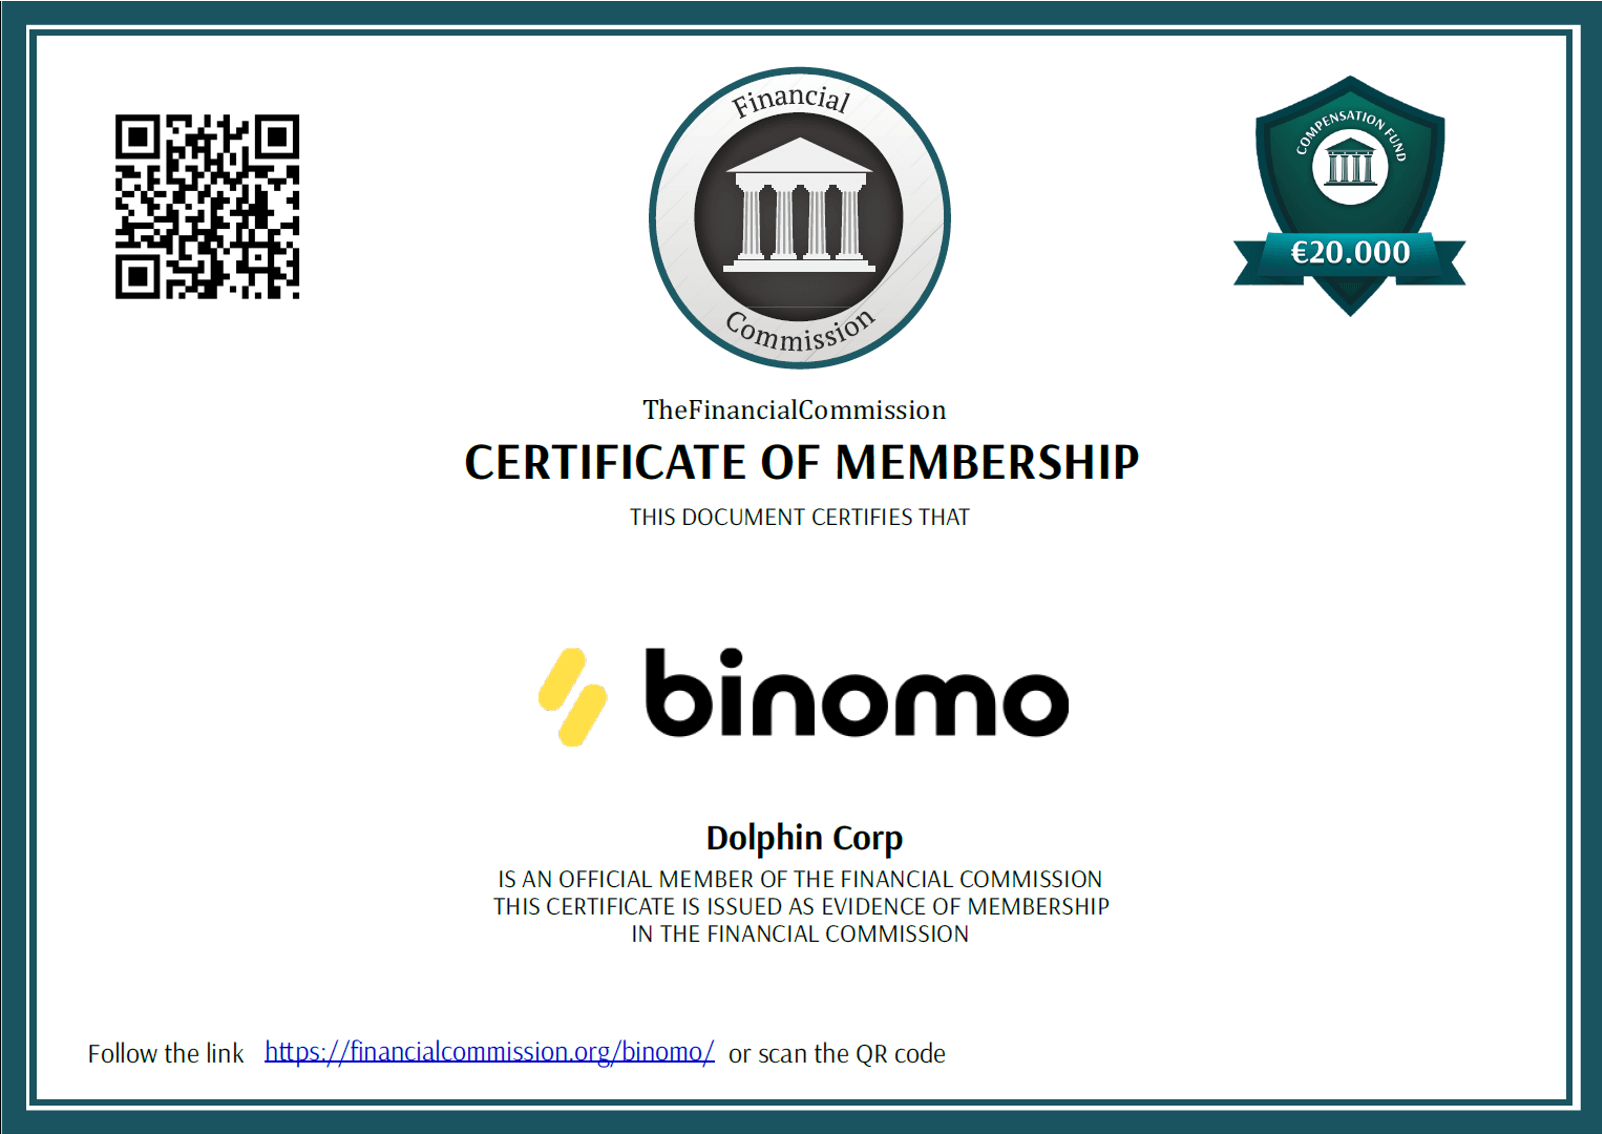 Binomo Certification for membership of The Financial Commission